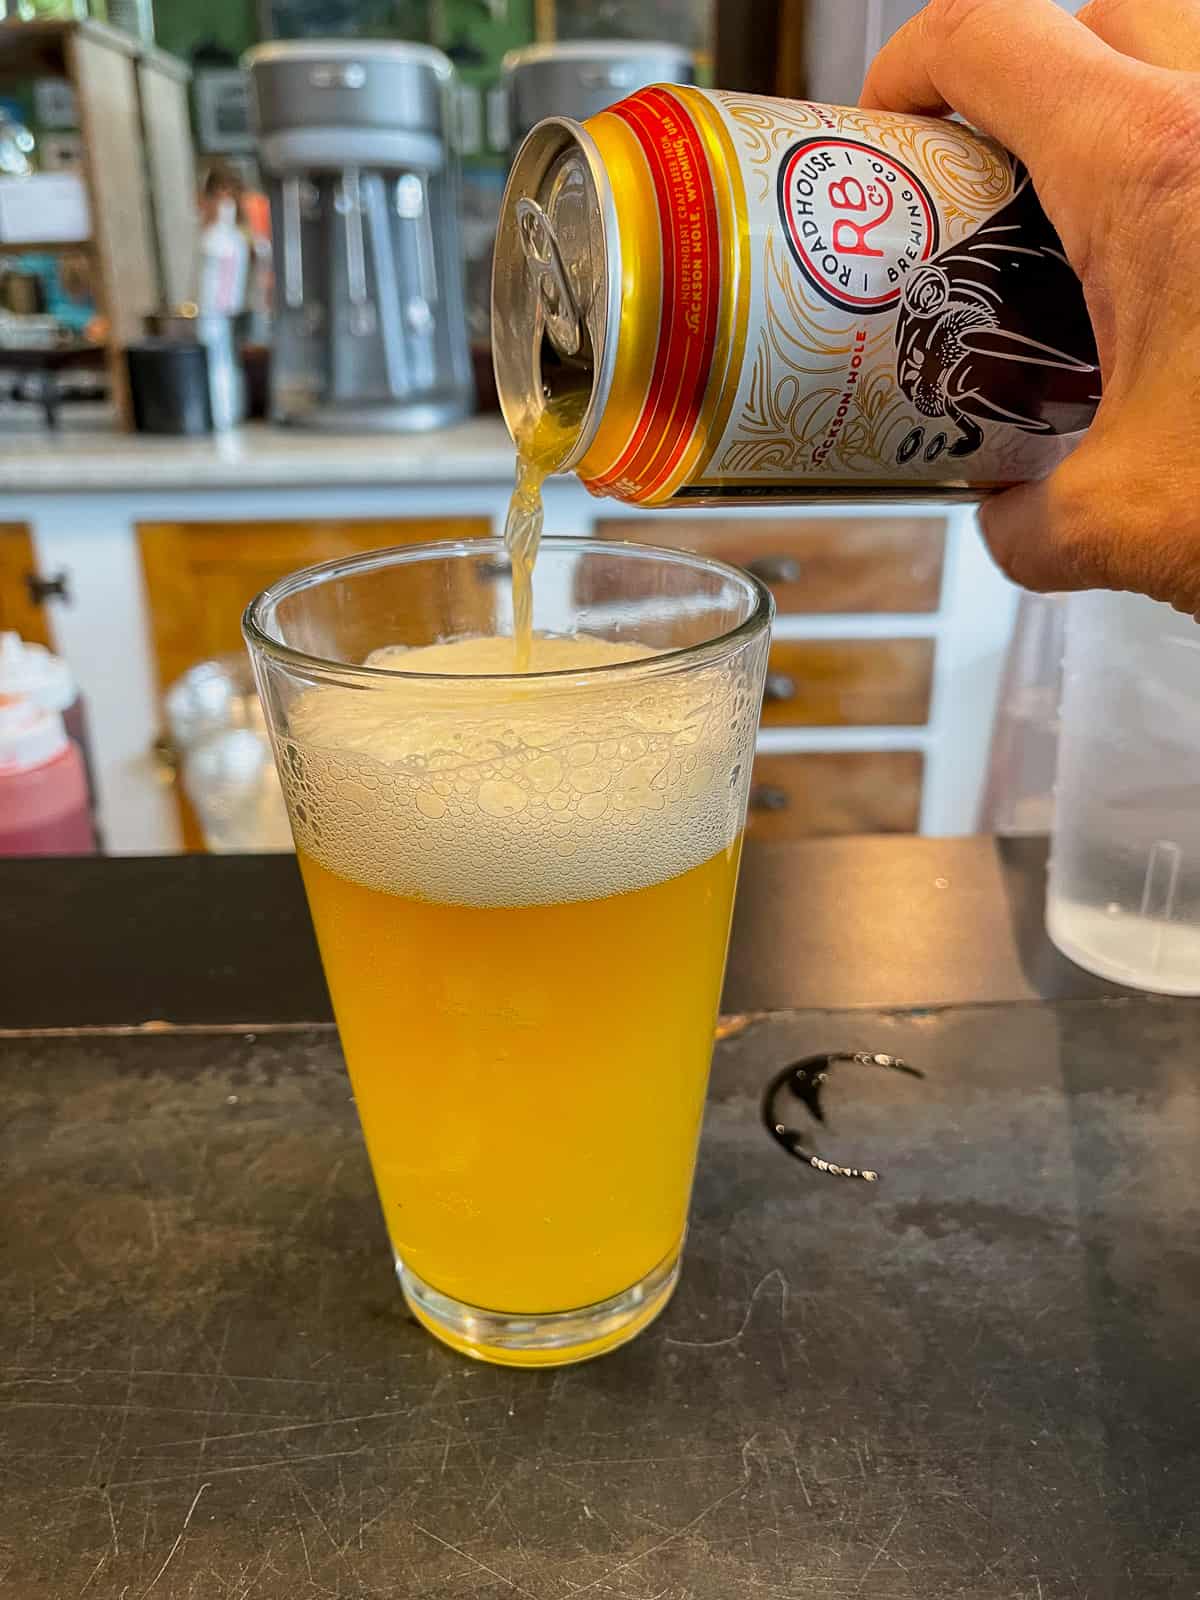 A hand pouring a beer into a glass.